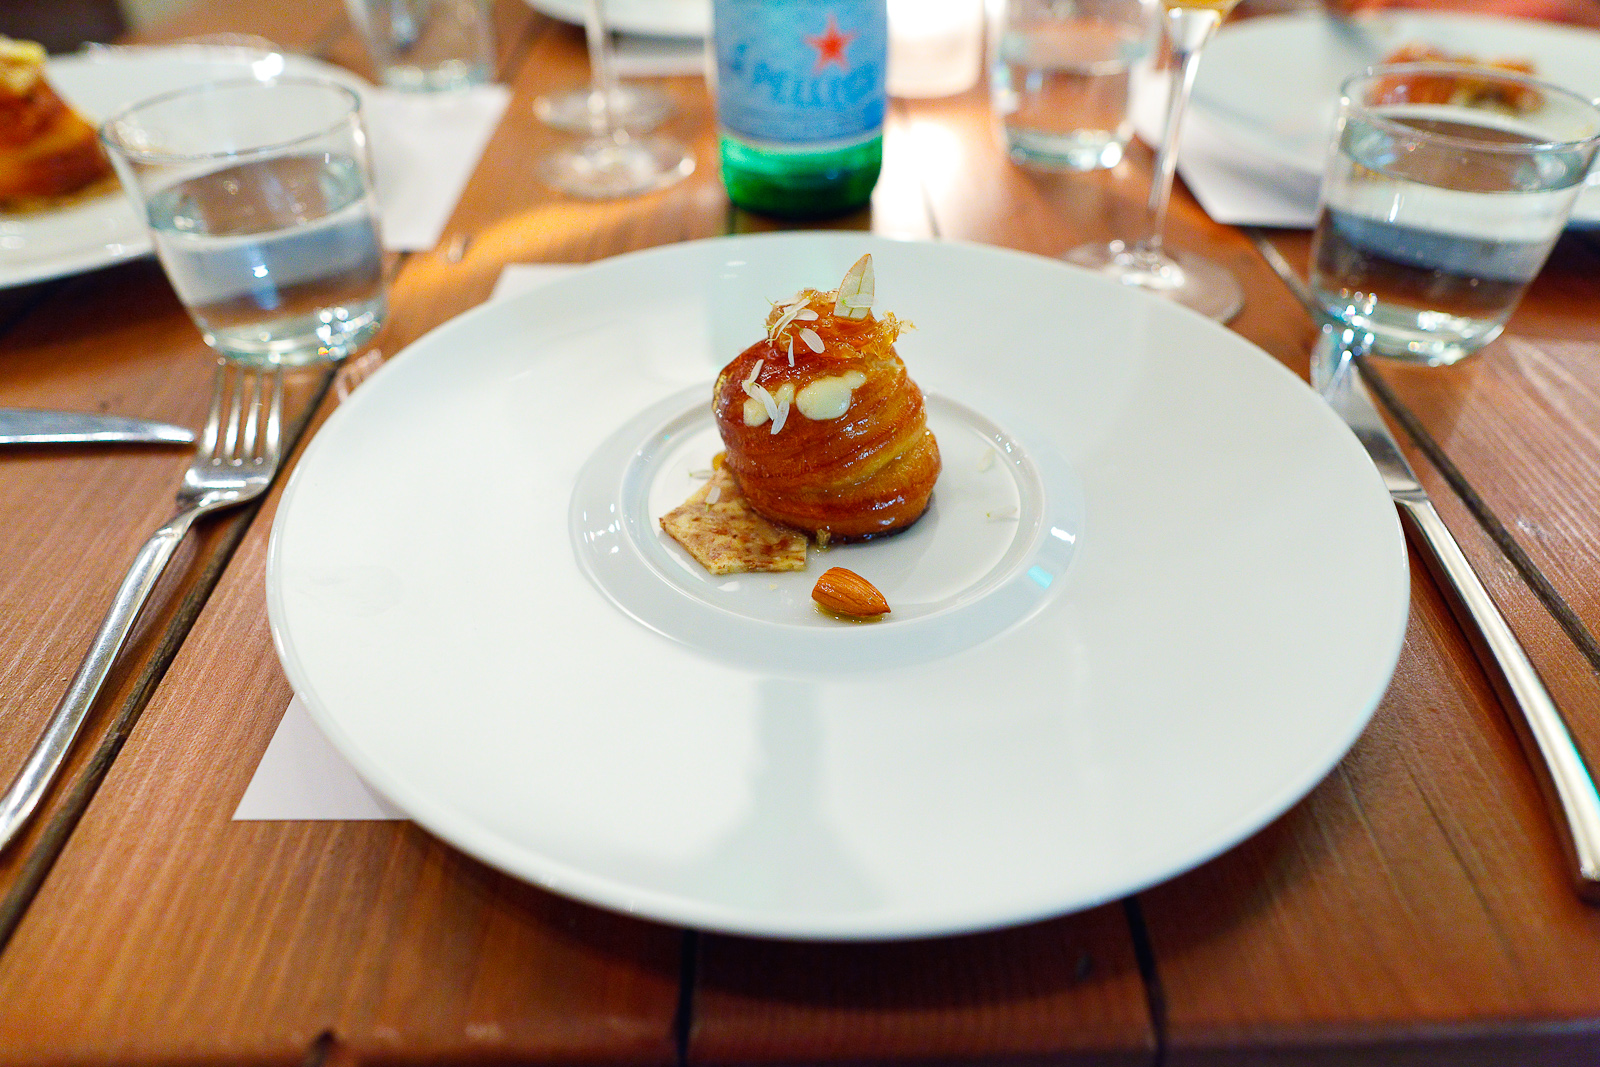 6th Course: Nuvola di percora - Warm nuvola di pecora piped into a freshly baked brioche with honeycomb.